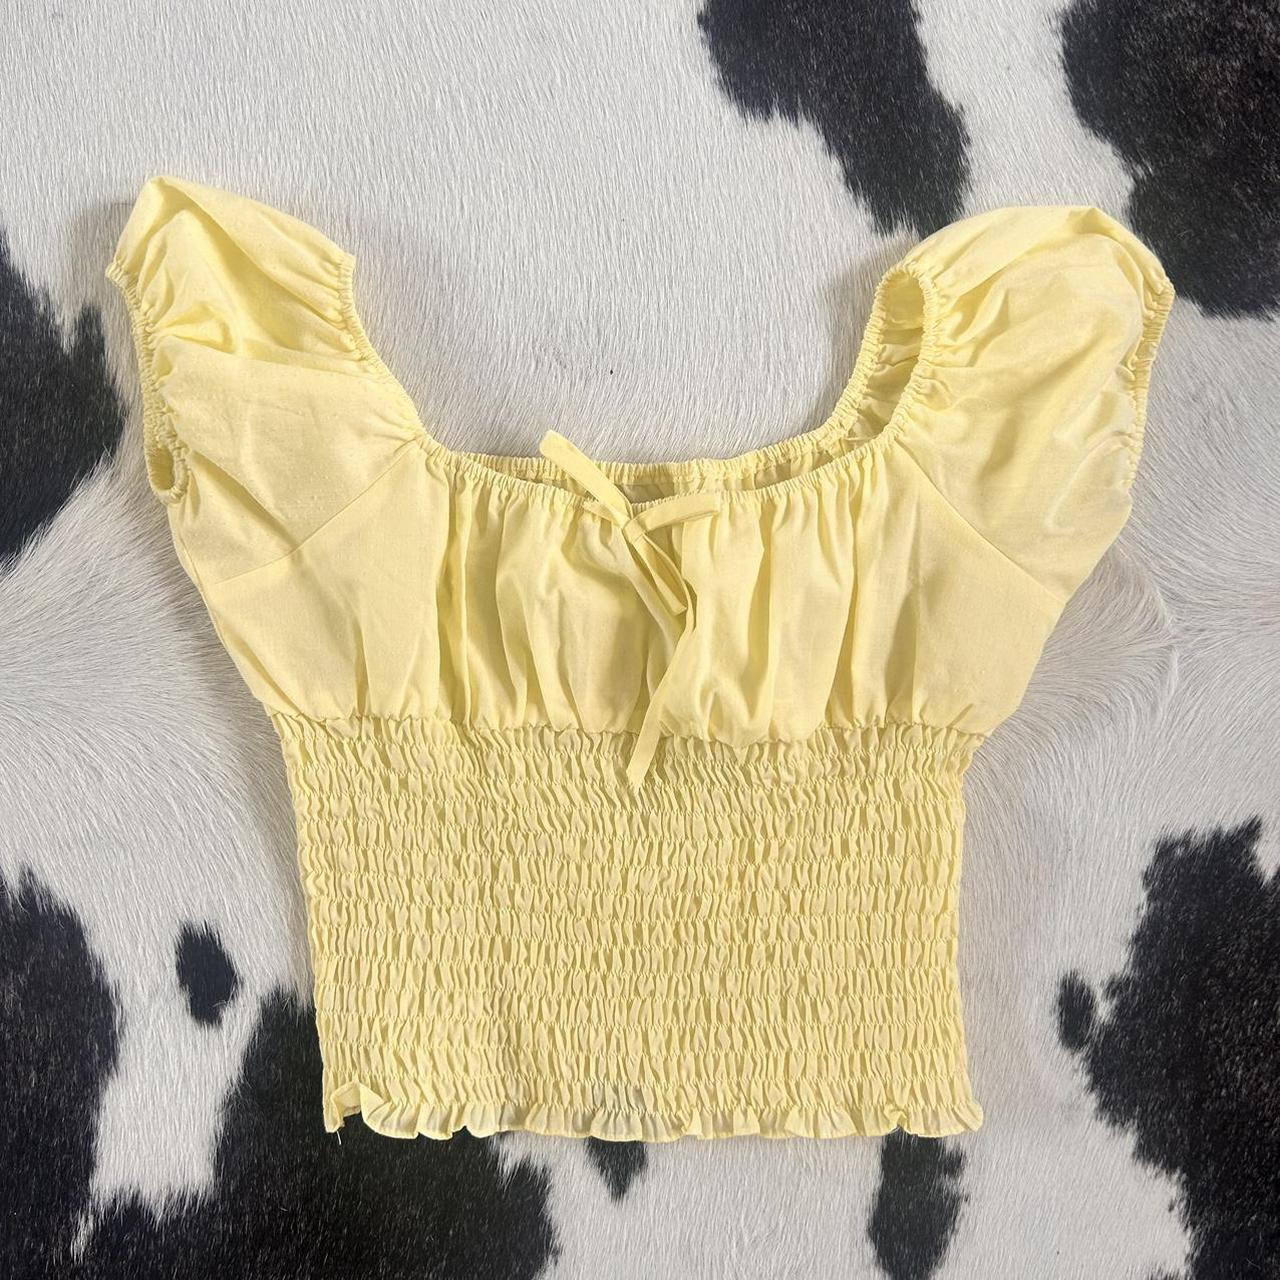 Cutest early 2000s Supre milkmaid style top 💛 Fave... - Depop